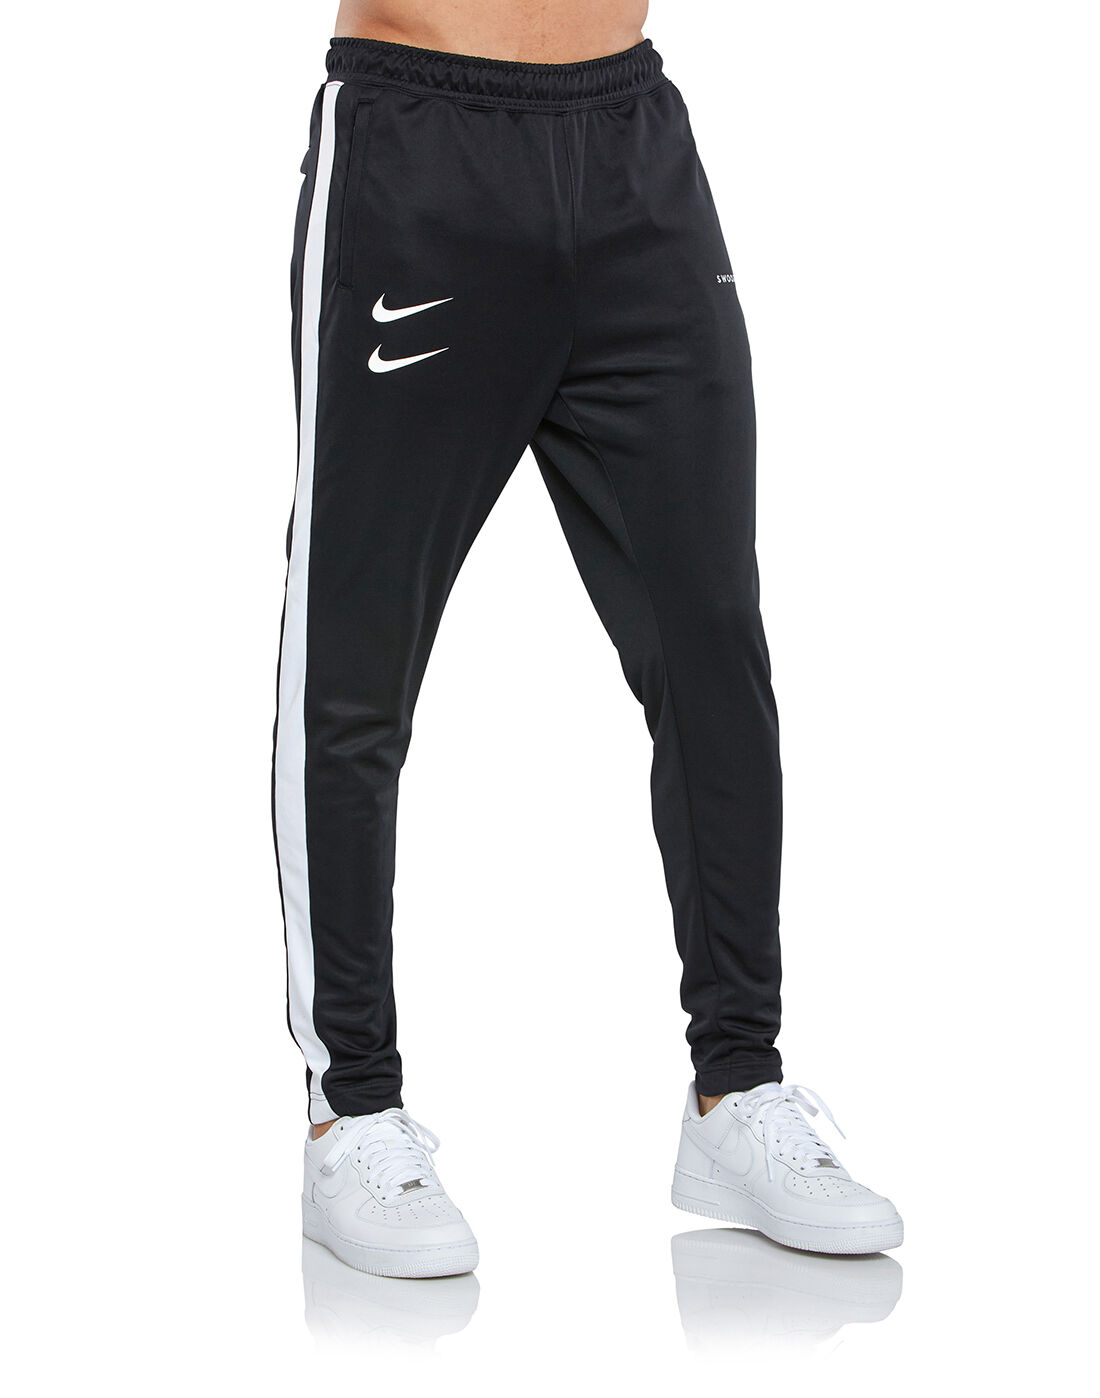 Mens Sports Track Pant - Mens Sports Track Pant buyers, suppliers,  importers, exporters and manufacturers - Latest price and trends